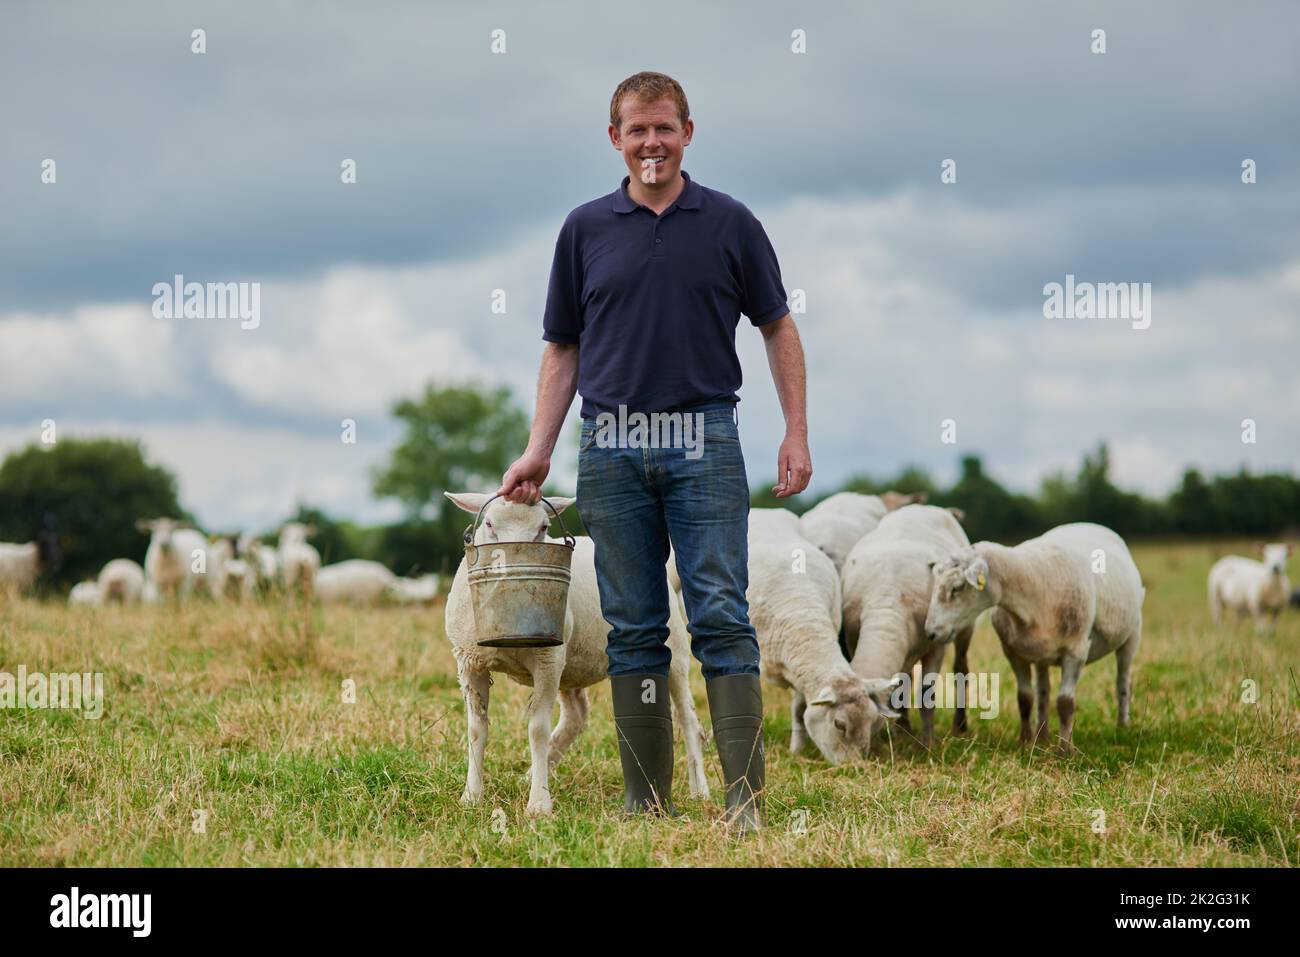 All in a days work on the farm. Portrait of a cheerful young farmer walking with a herd of sheep and feeding them while holding a bucket. Stock Photo